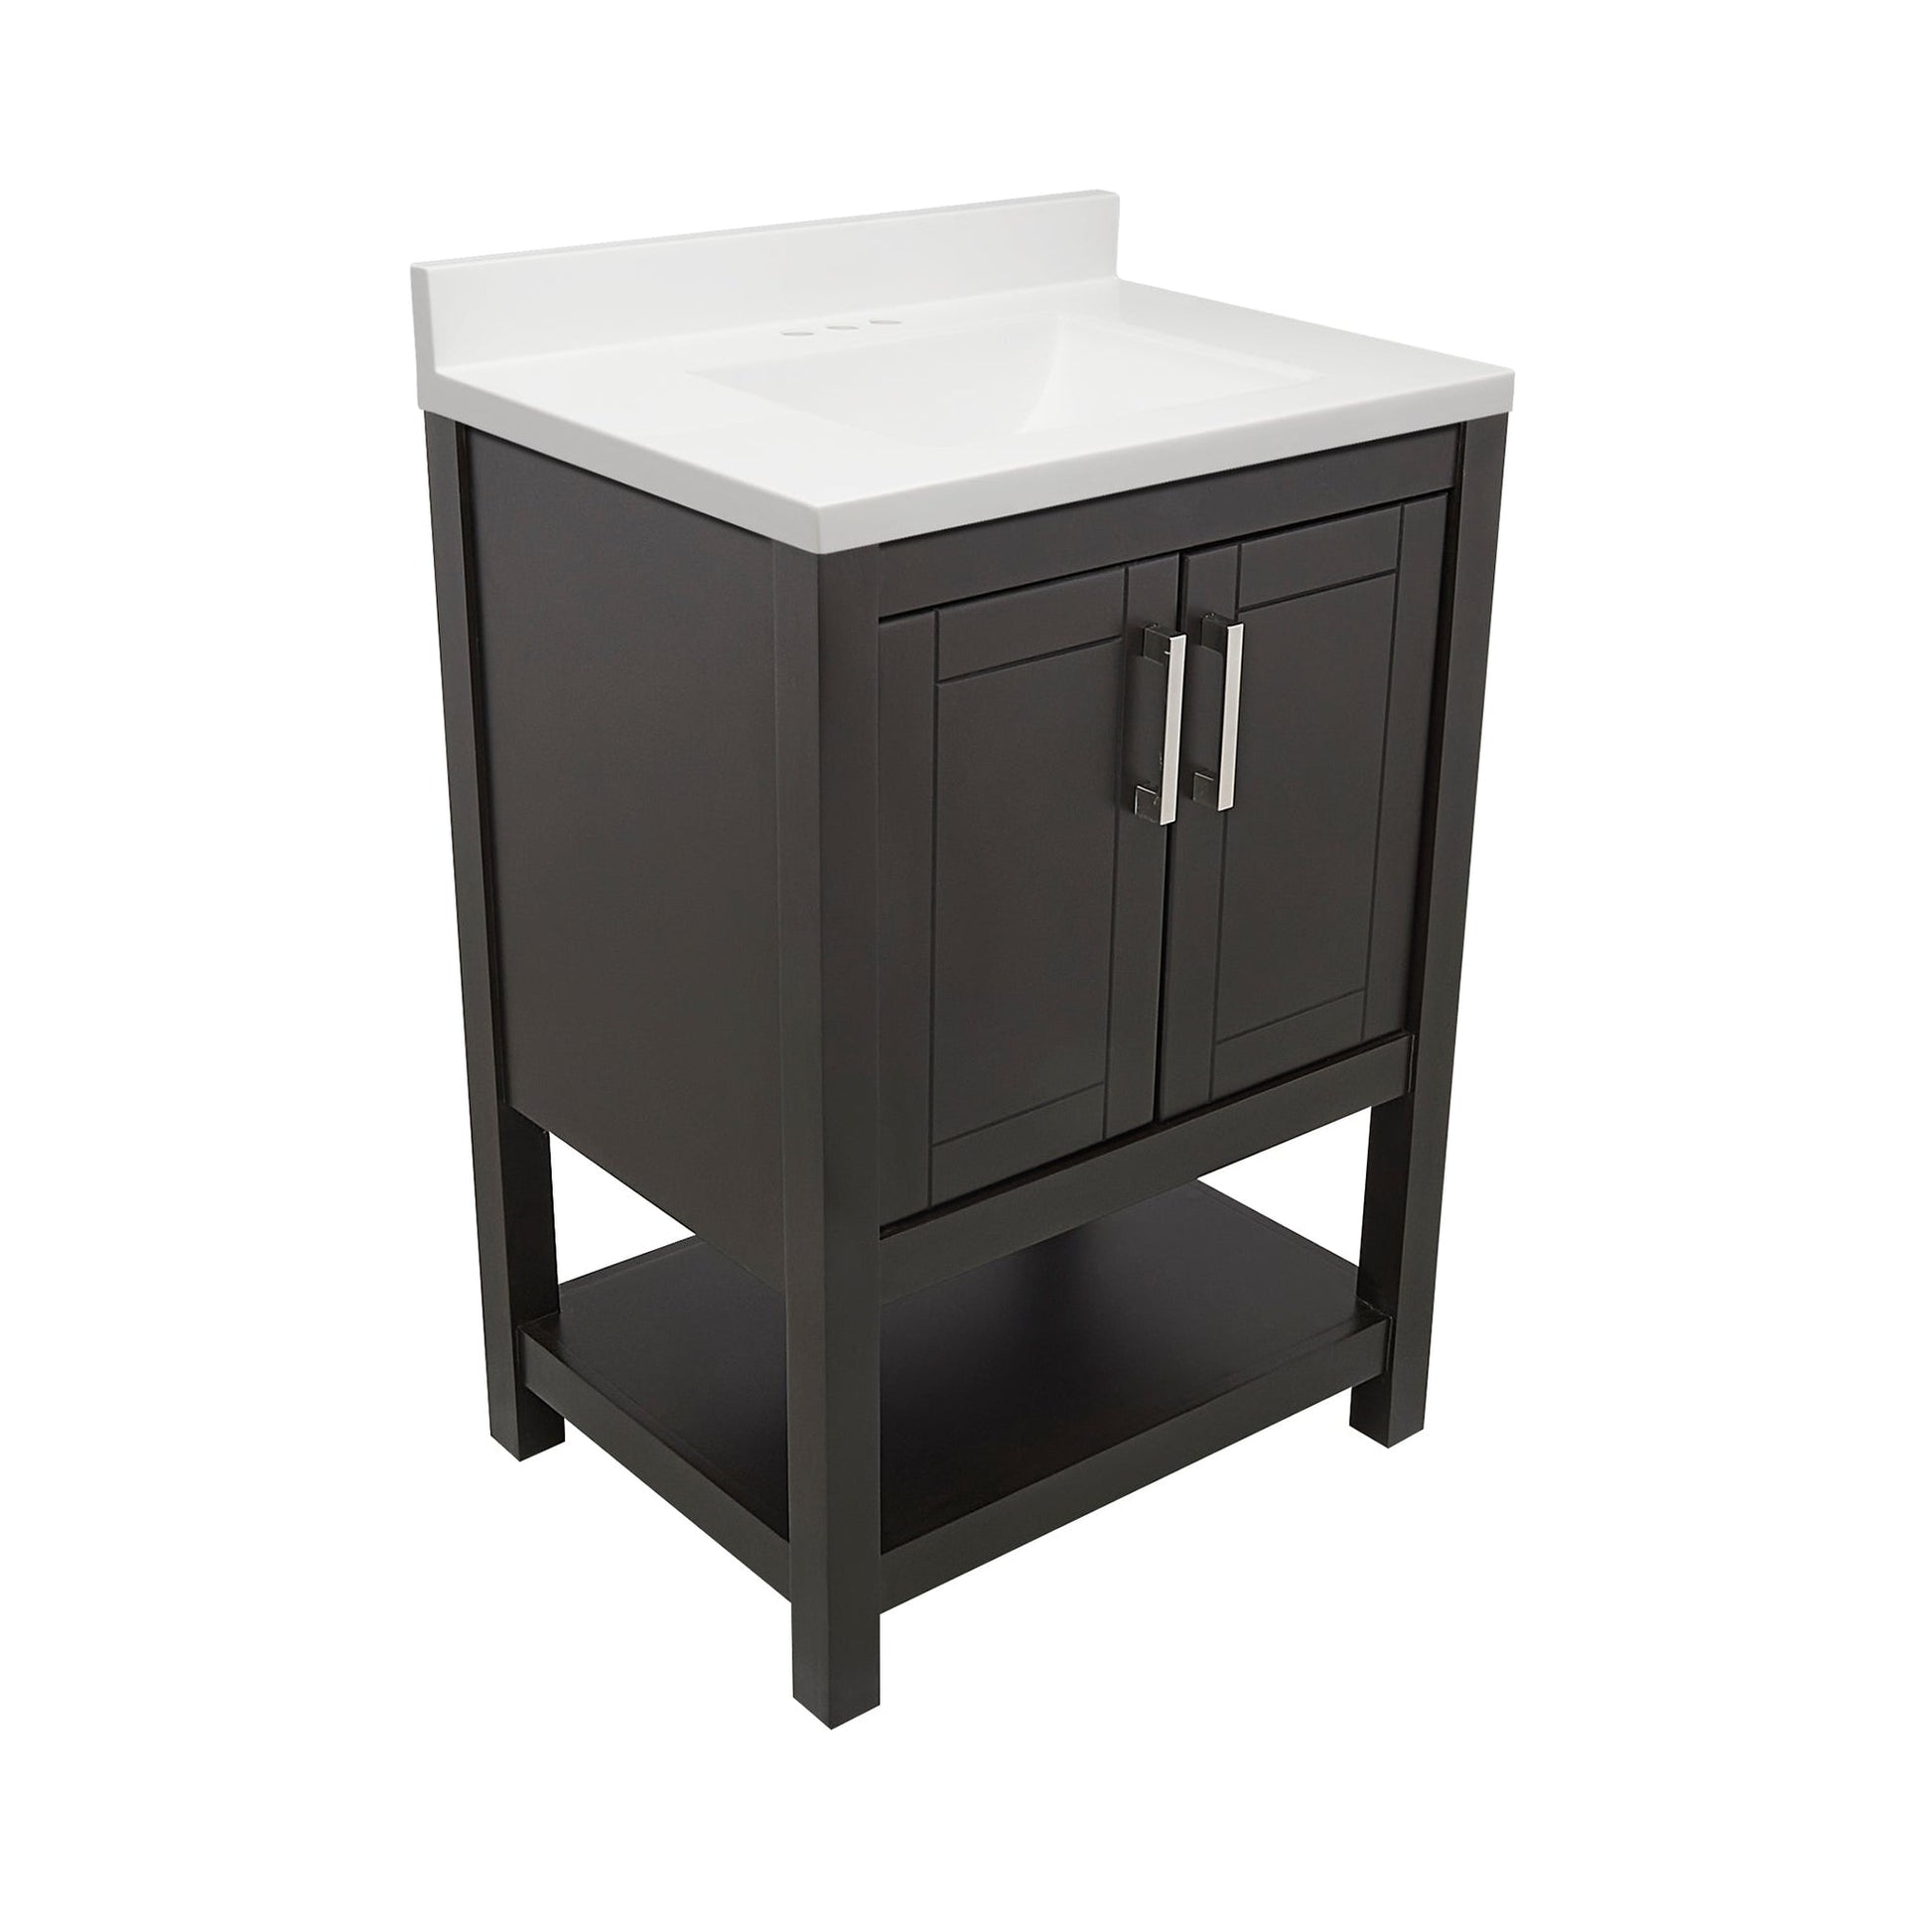 Ella's Bubbles Taos 25" Espresso Bathroom Vanity With White Cultured Marble Top With White Backsplash and Sink